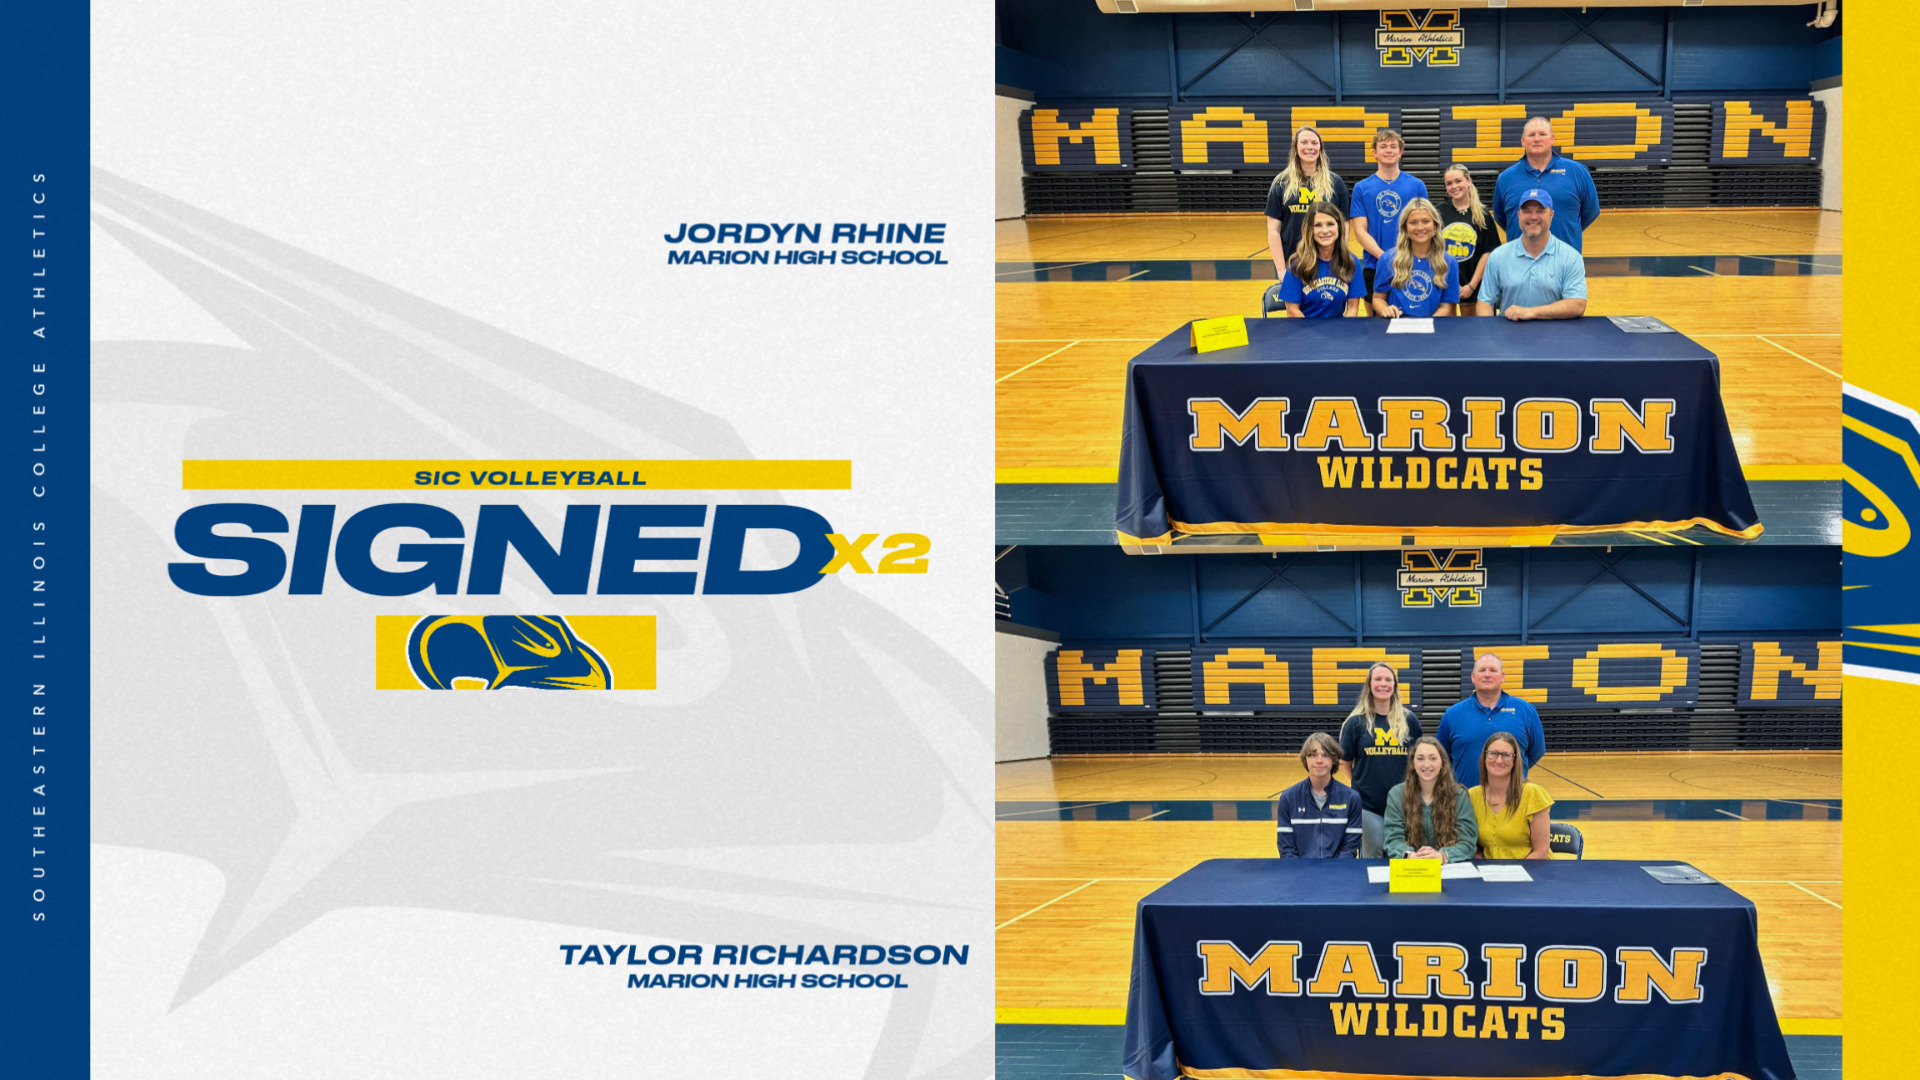 Southeastern IllinoisSlide 5 - SIC VOLLEYBALL SIGNS TWO FROM MARION